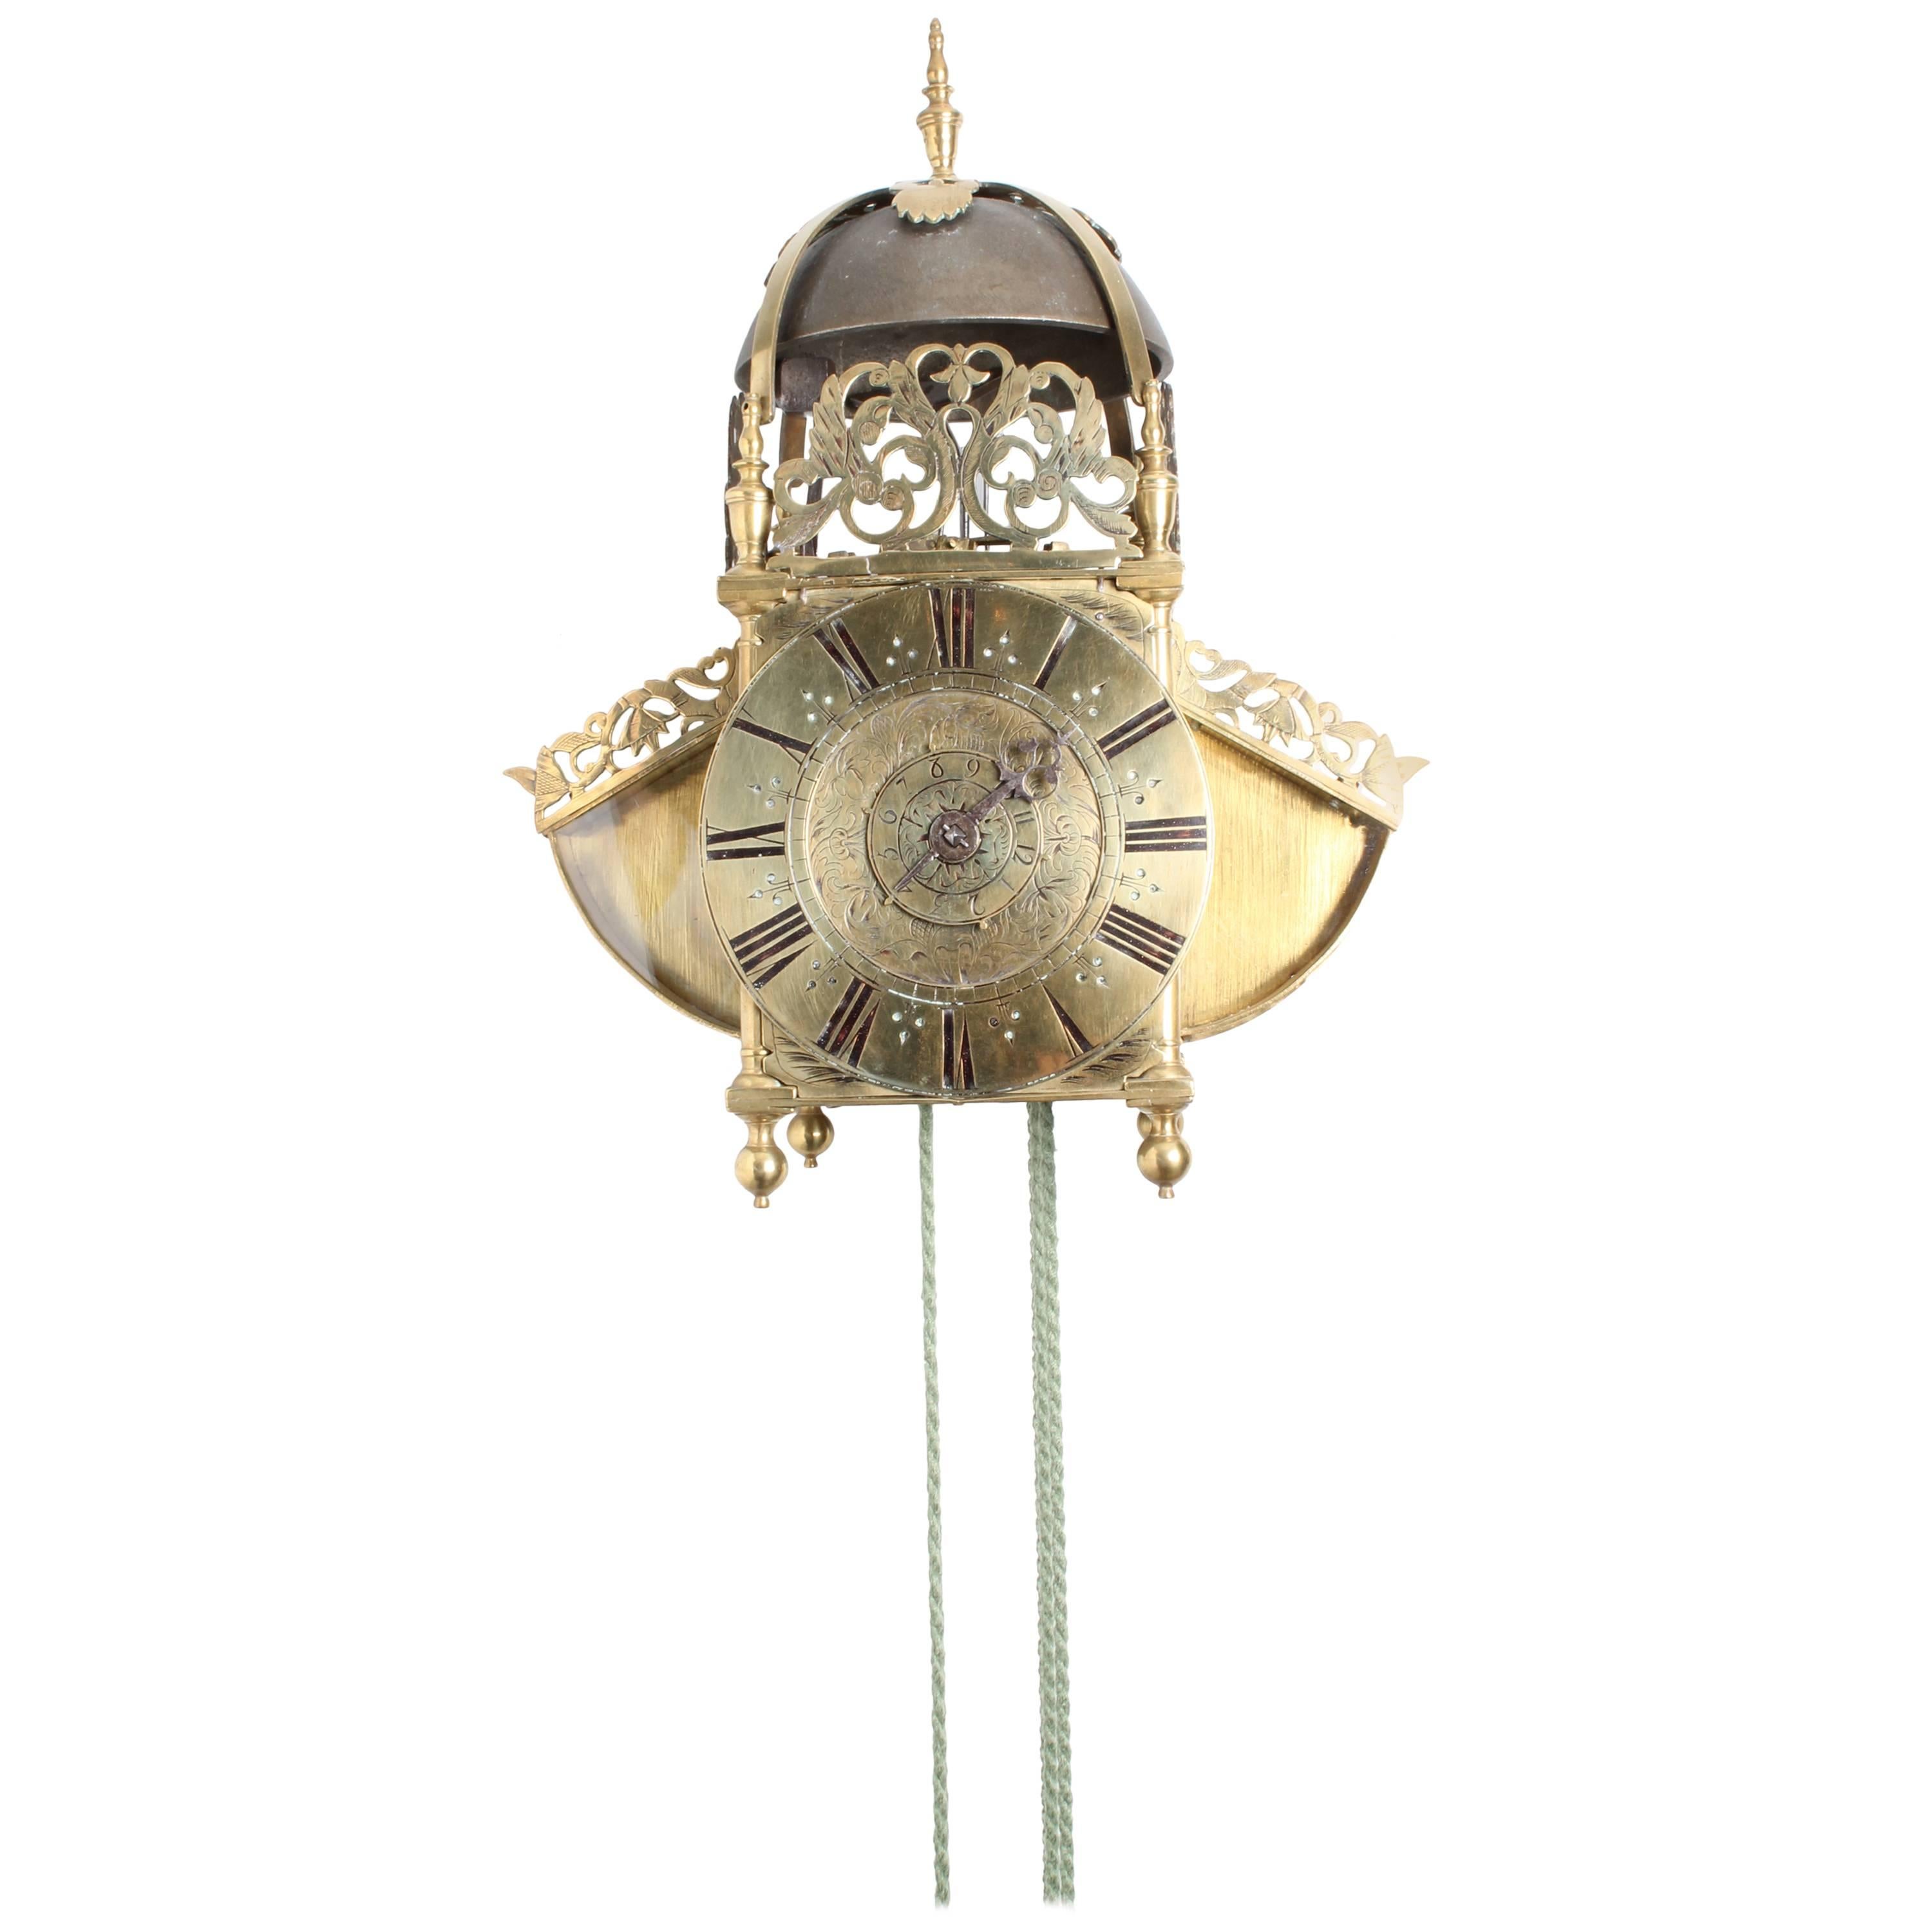 Day-Going Weight Driven Movement, Count-Wheel Hour Striking and Alarm on a Bell For Sale